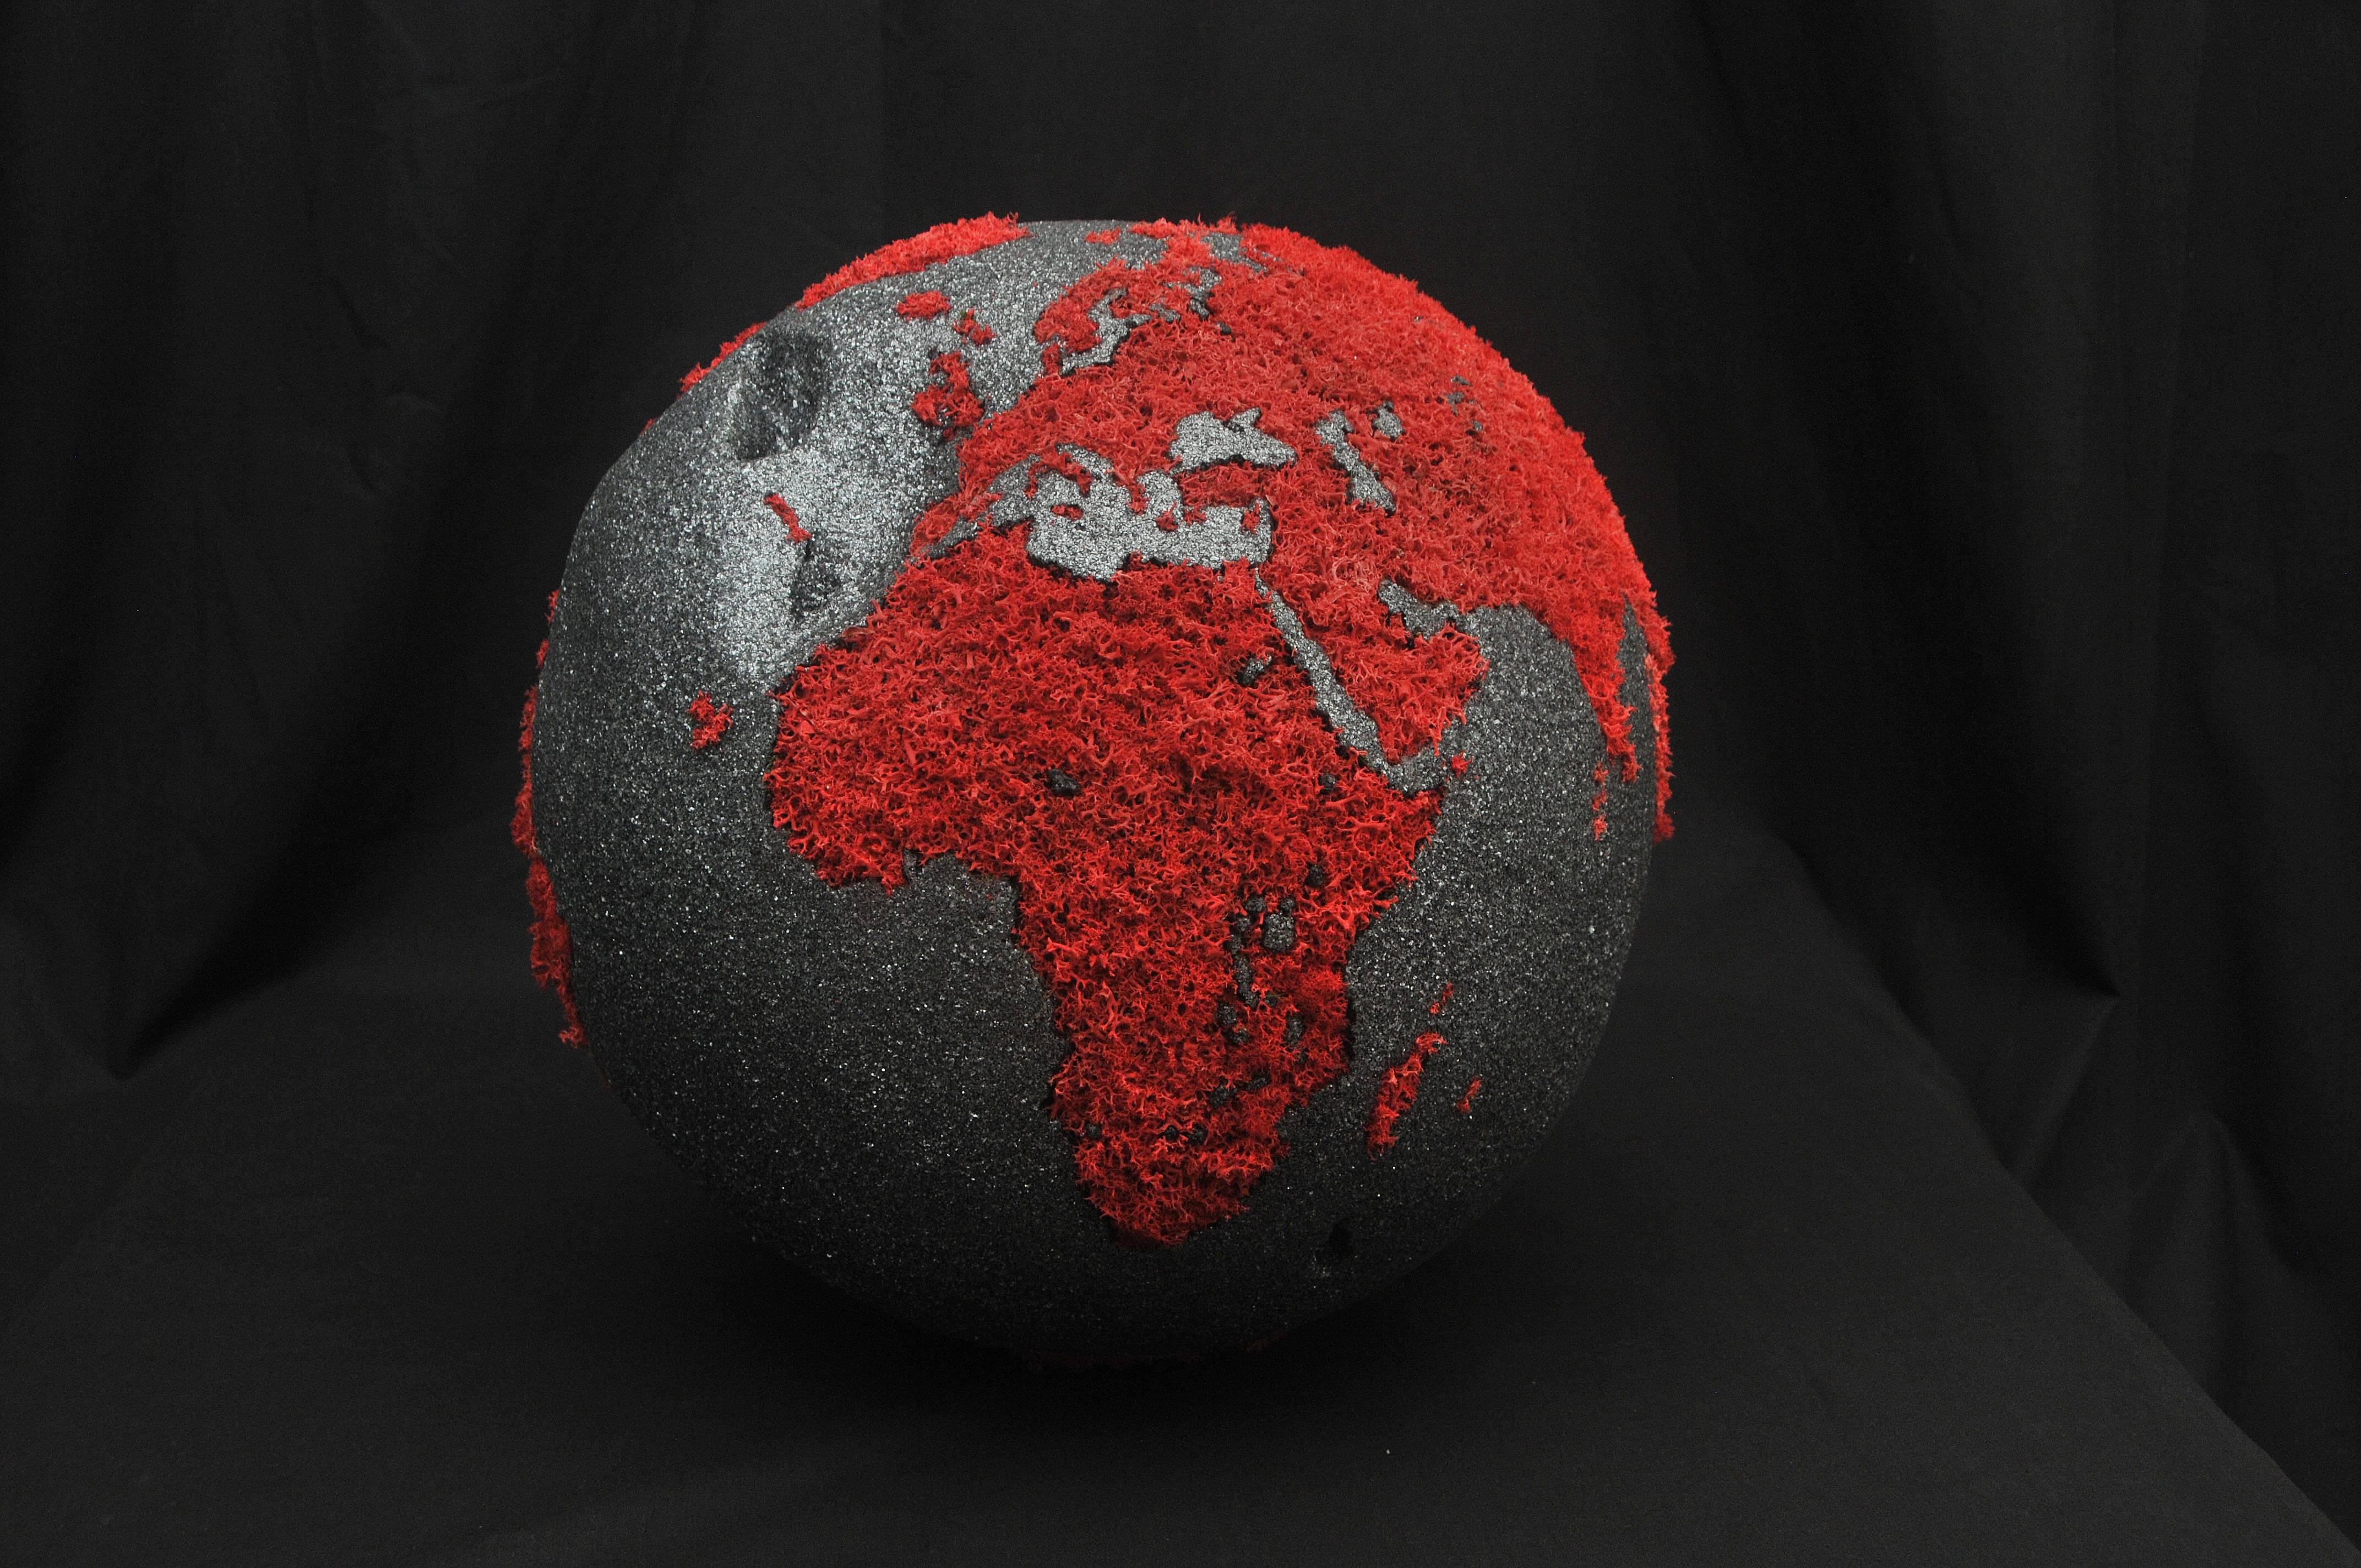 One of a kind 30 cm teak globe hand-carved
Rotative base 
Signed: HB Numbered 01 / 08 / 2016 
Finishing: 
Black mica on oceans 
Stabilized red lichen on continents.
 